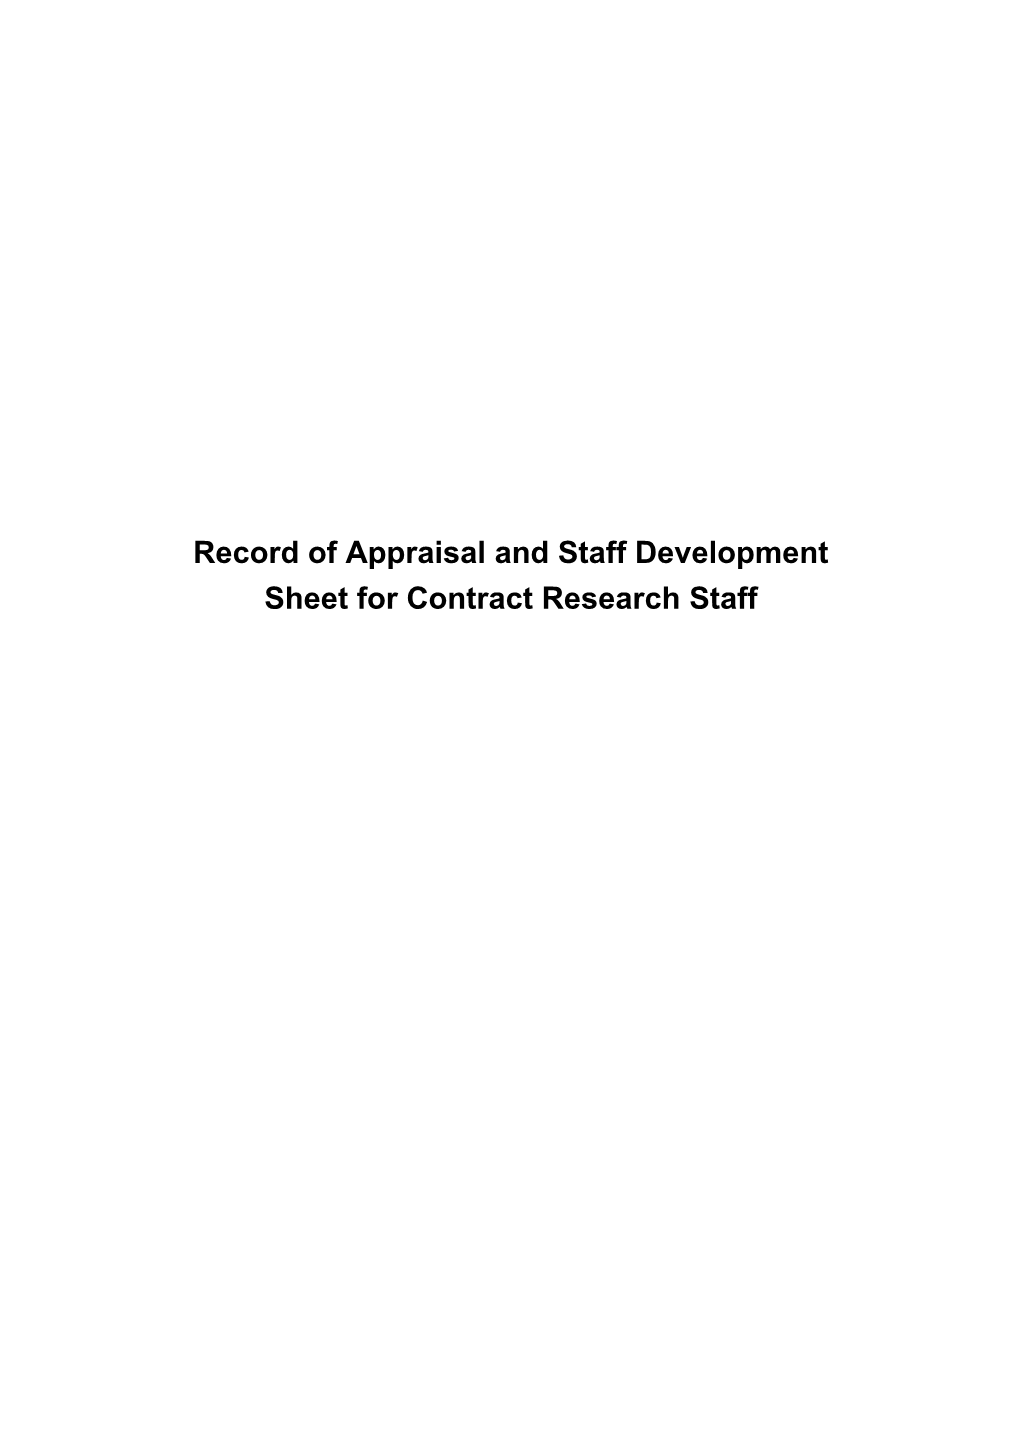 Record of Appraisal and Staff Development